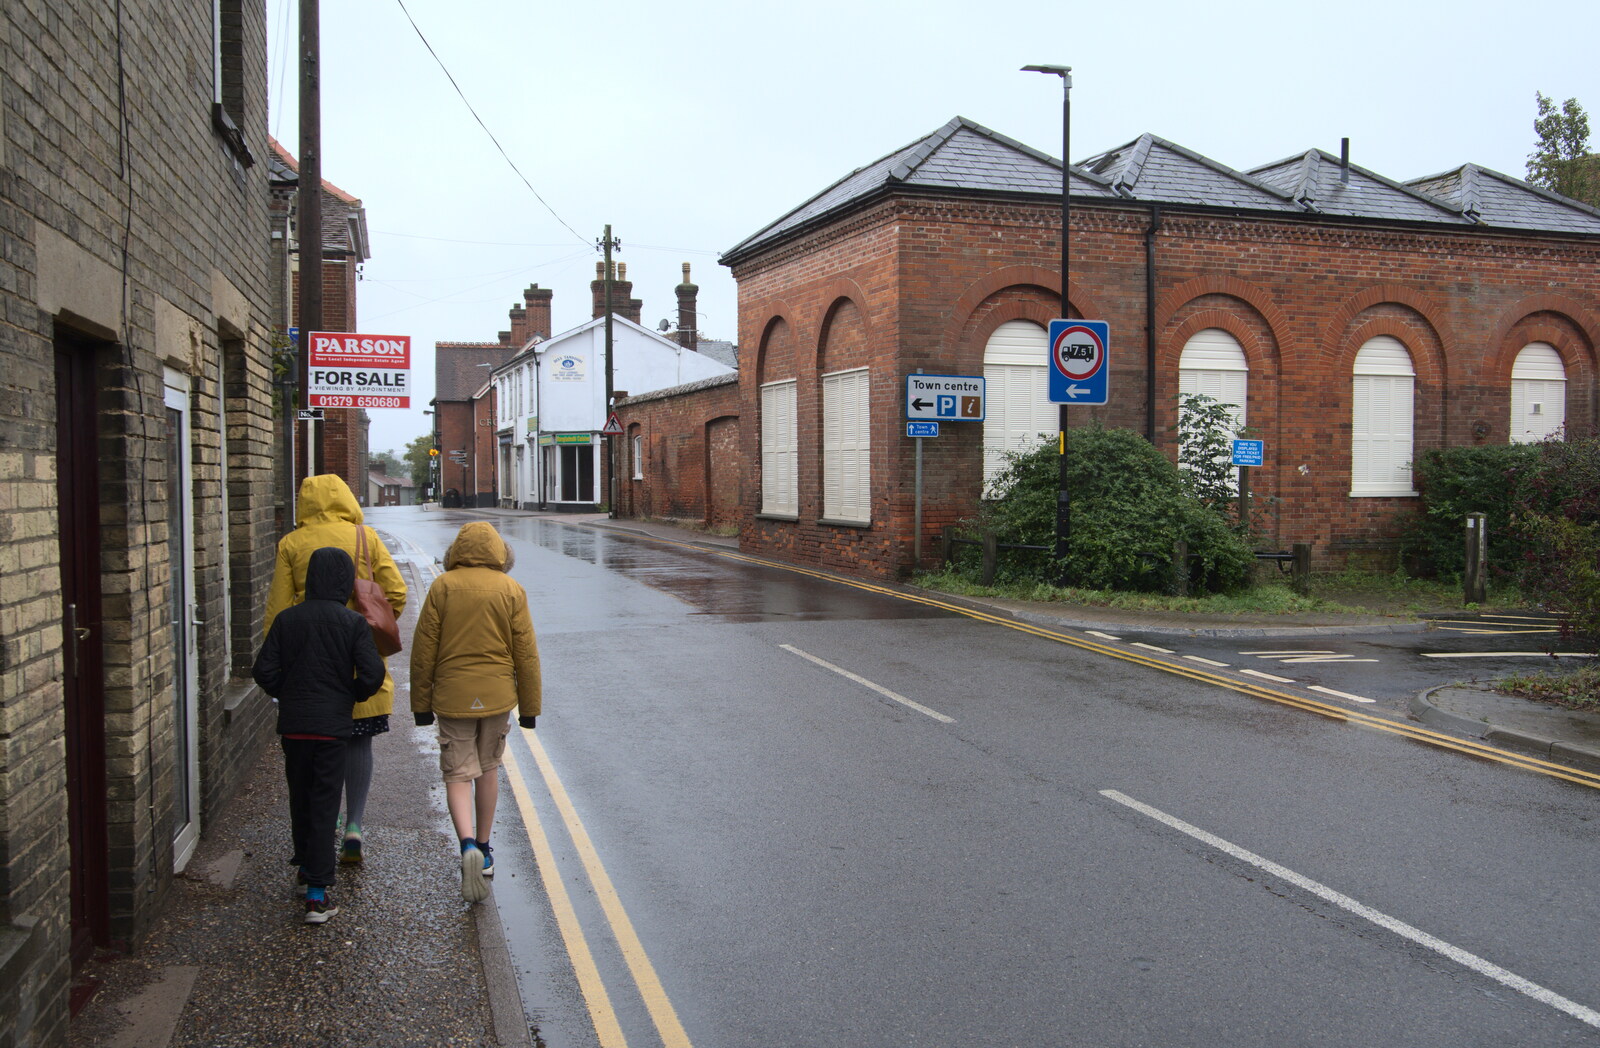 Walking along a wet Shelfanger Road from A Trip to Diss and Station 119, Eye, Suffolk - 26th September 2020